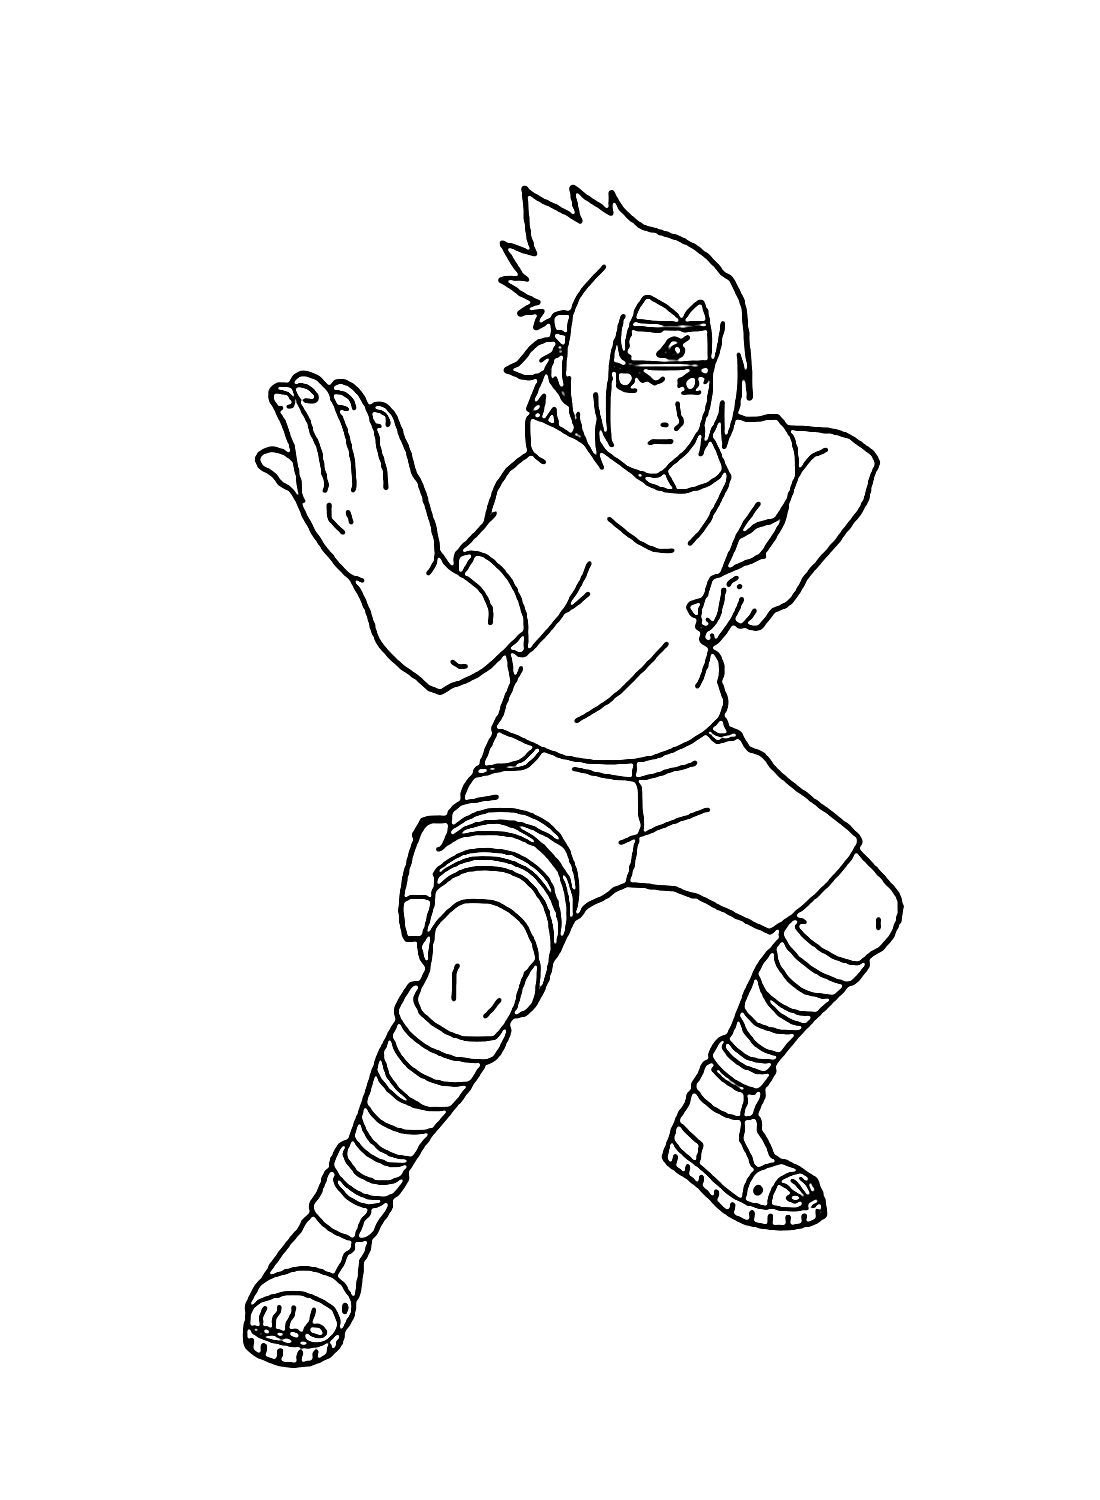 Sasuke Coloring Pages - Free Printable Coloring Pages